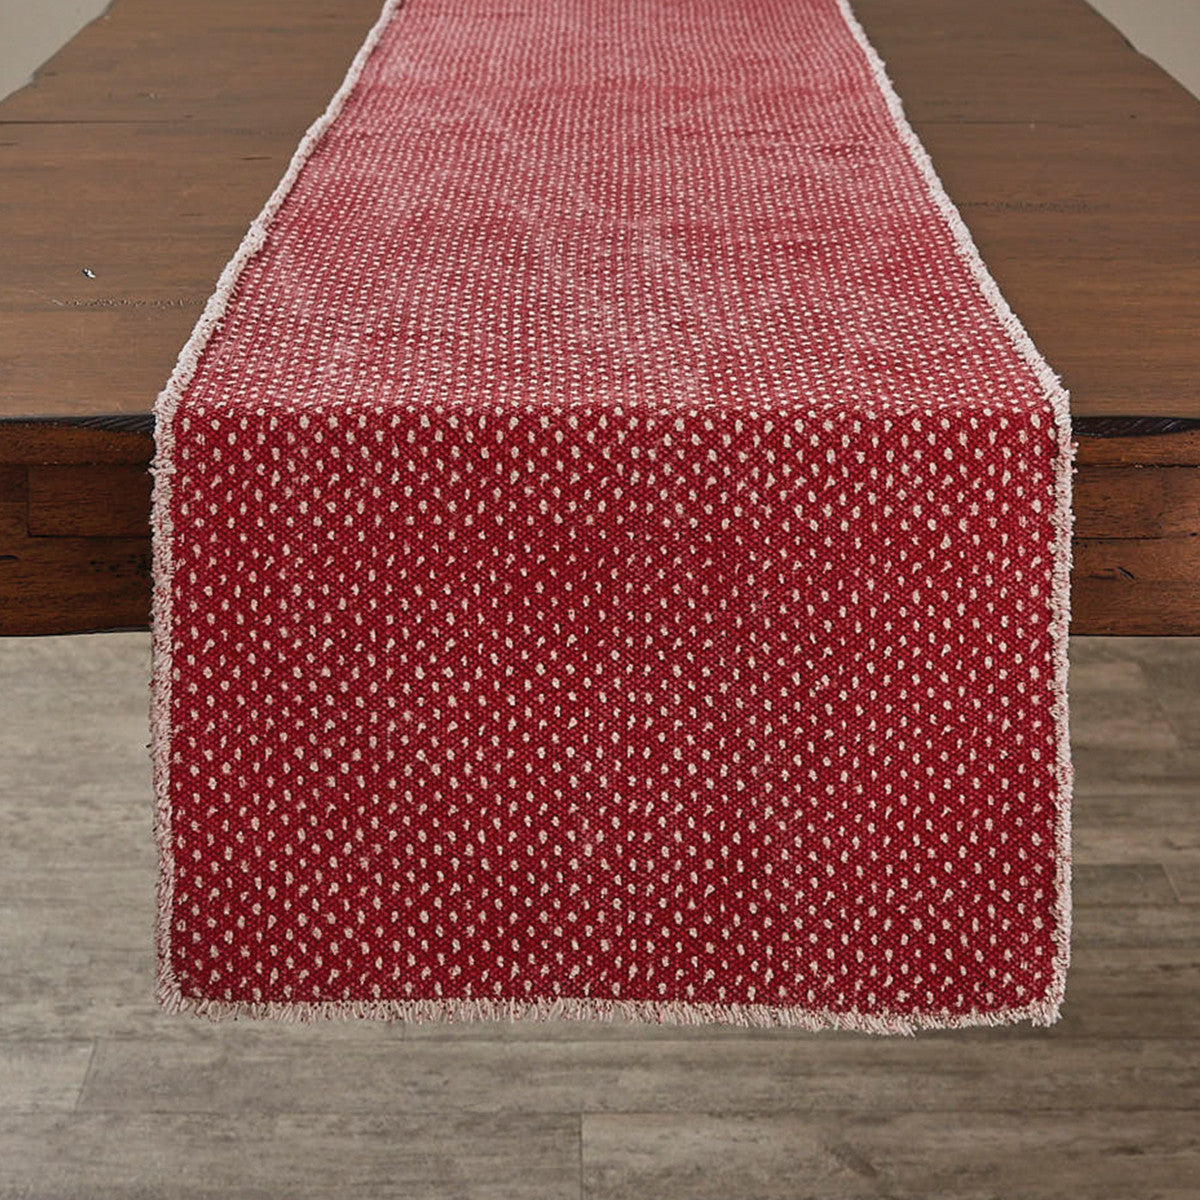 Mini Dots Printed Table Runner - 72"L Red Park Designs